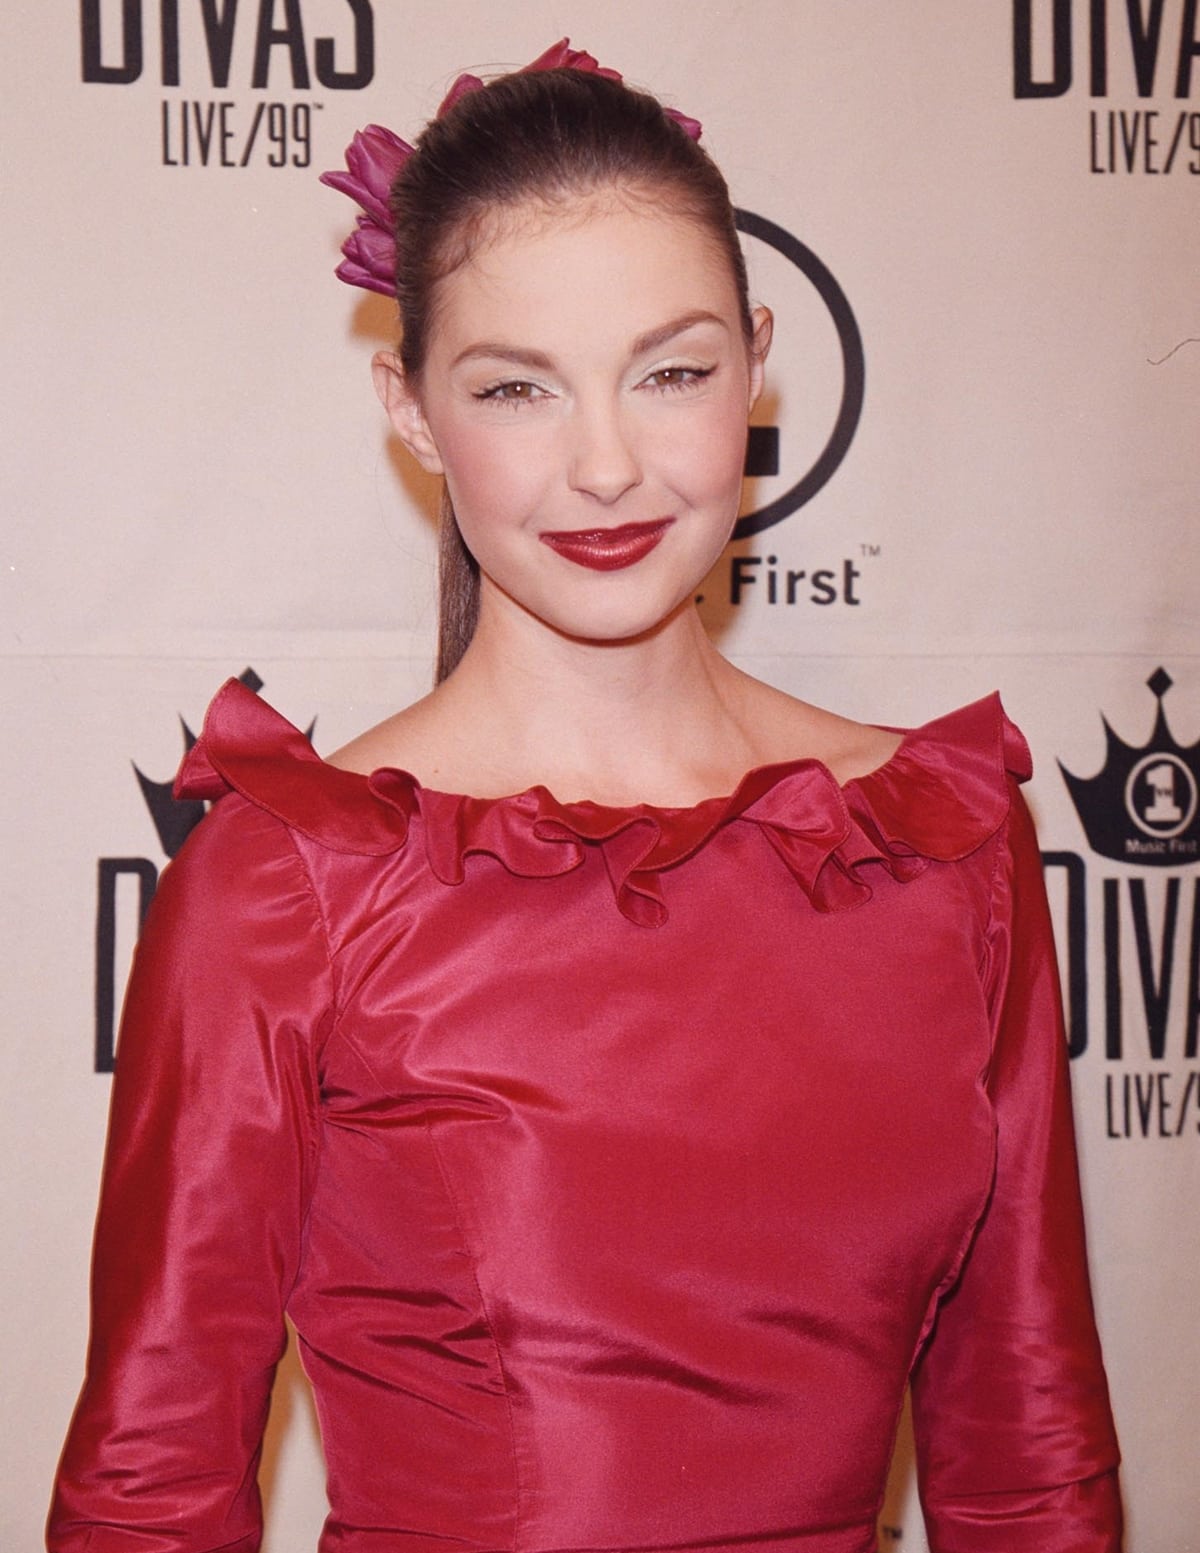 Young Ashley Judd poses at the VH1 Divas Live concert on April 13, 1999, at the Beacon Theater